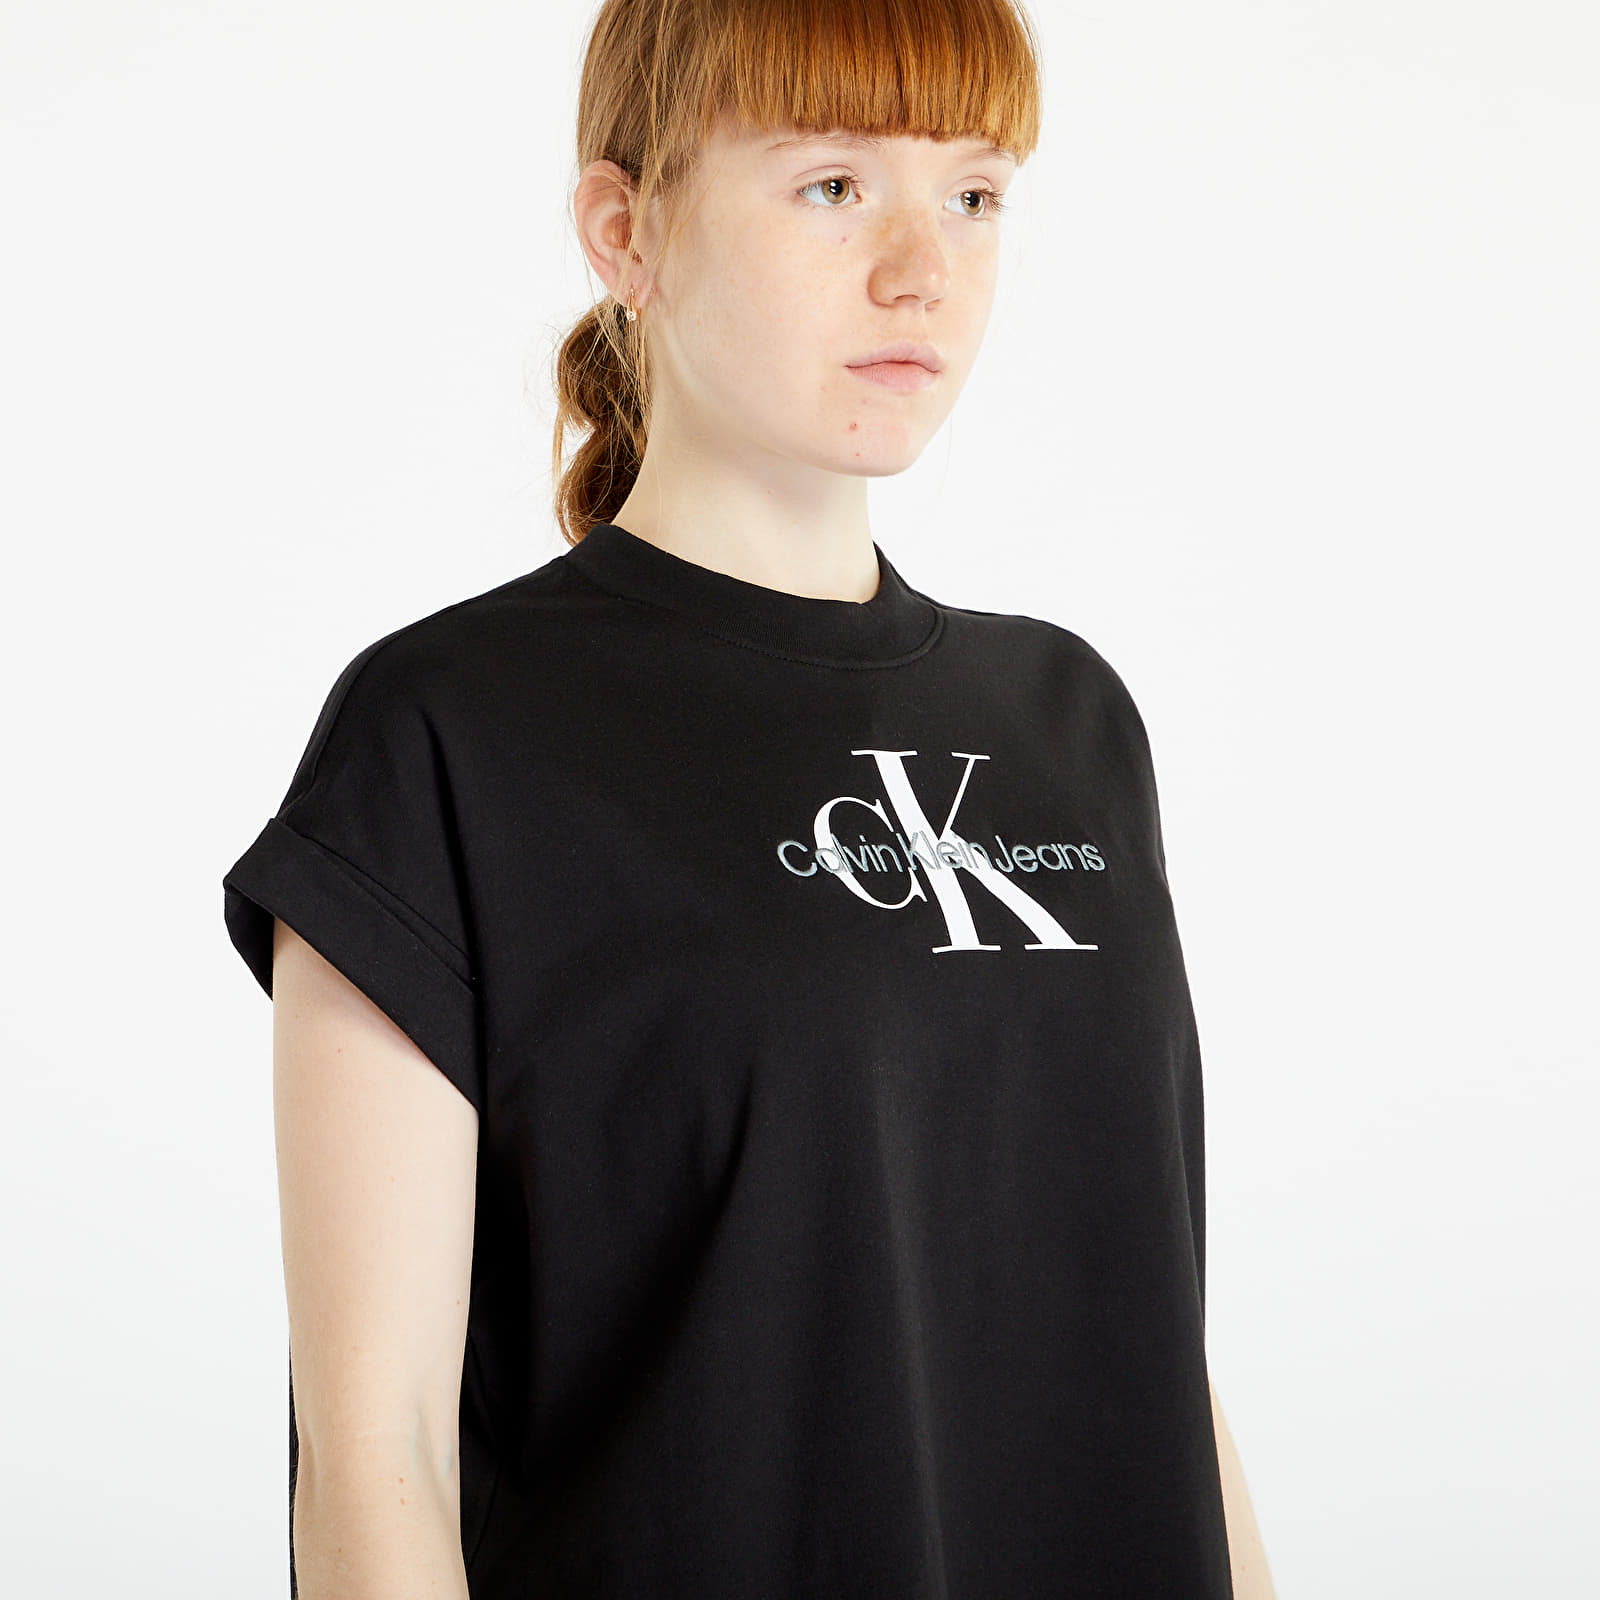 CALVIN KLEIN JEANS COTTON T-SHIRT WITH FRONT AND BACK LOGO Woman CK Black